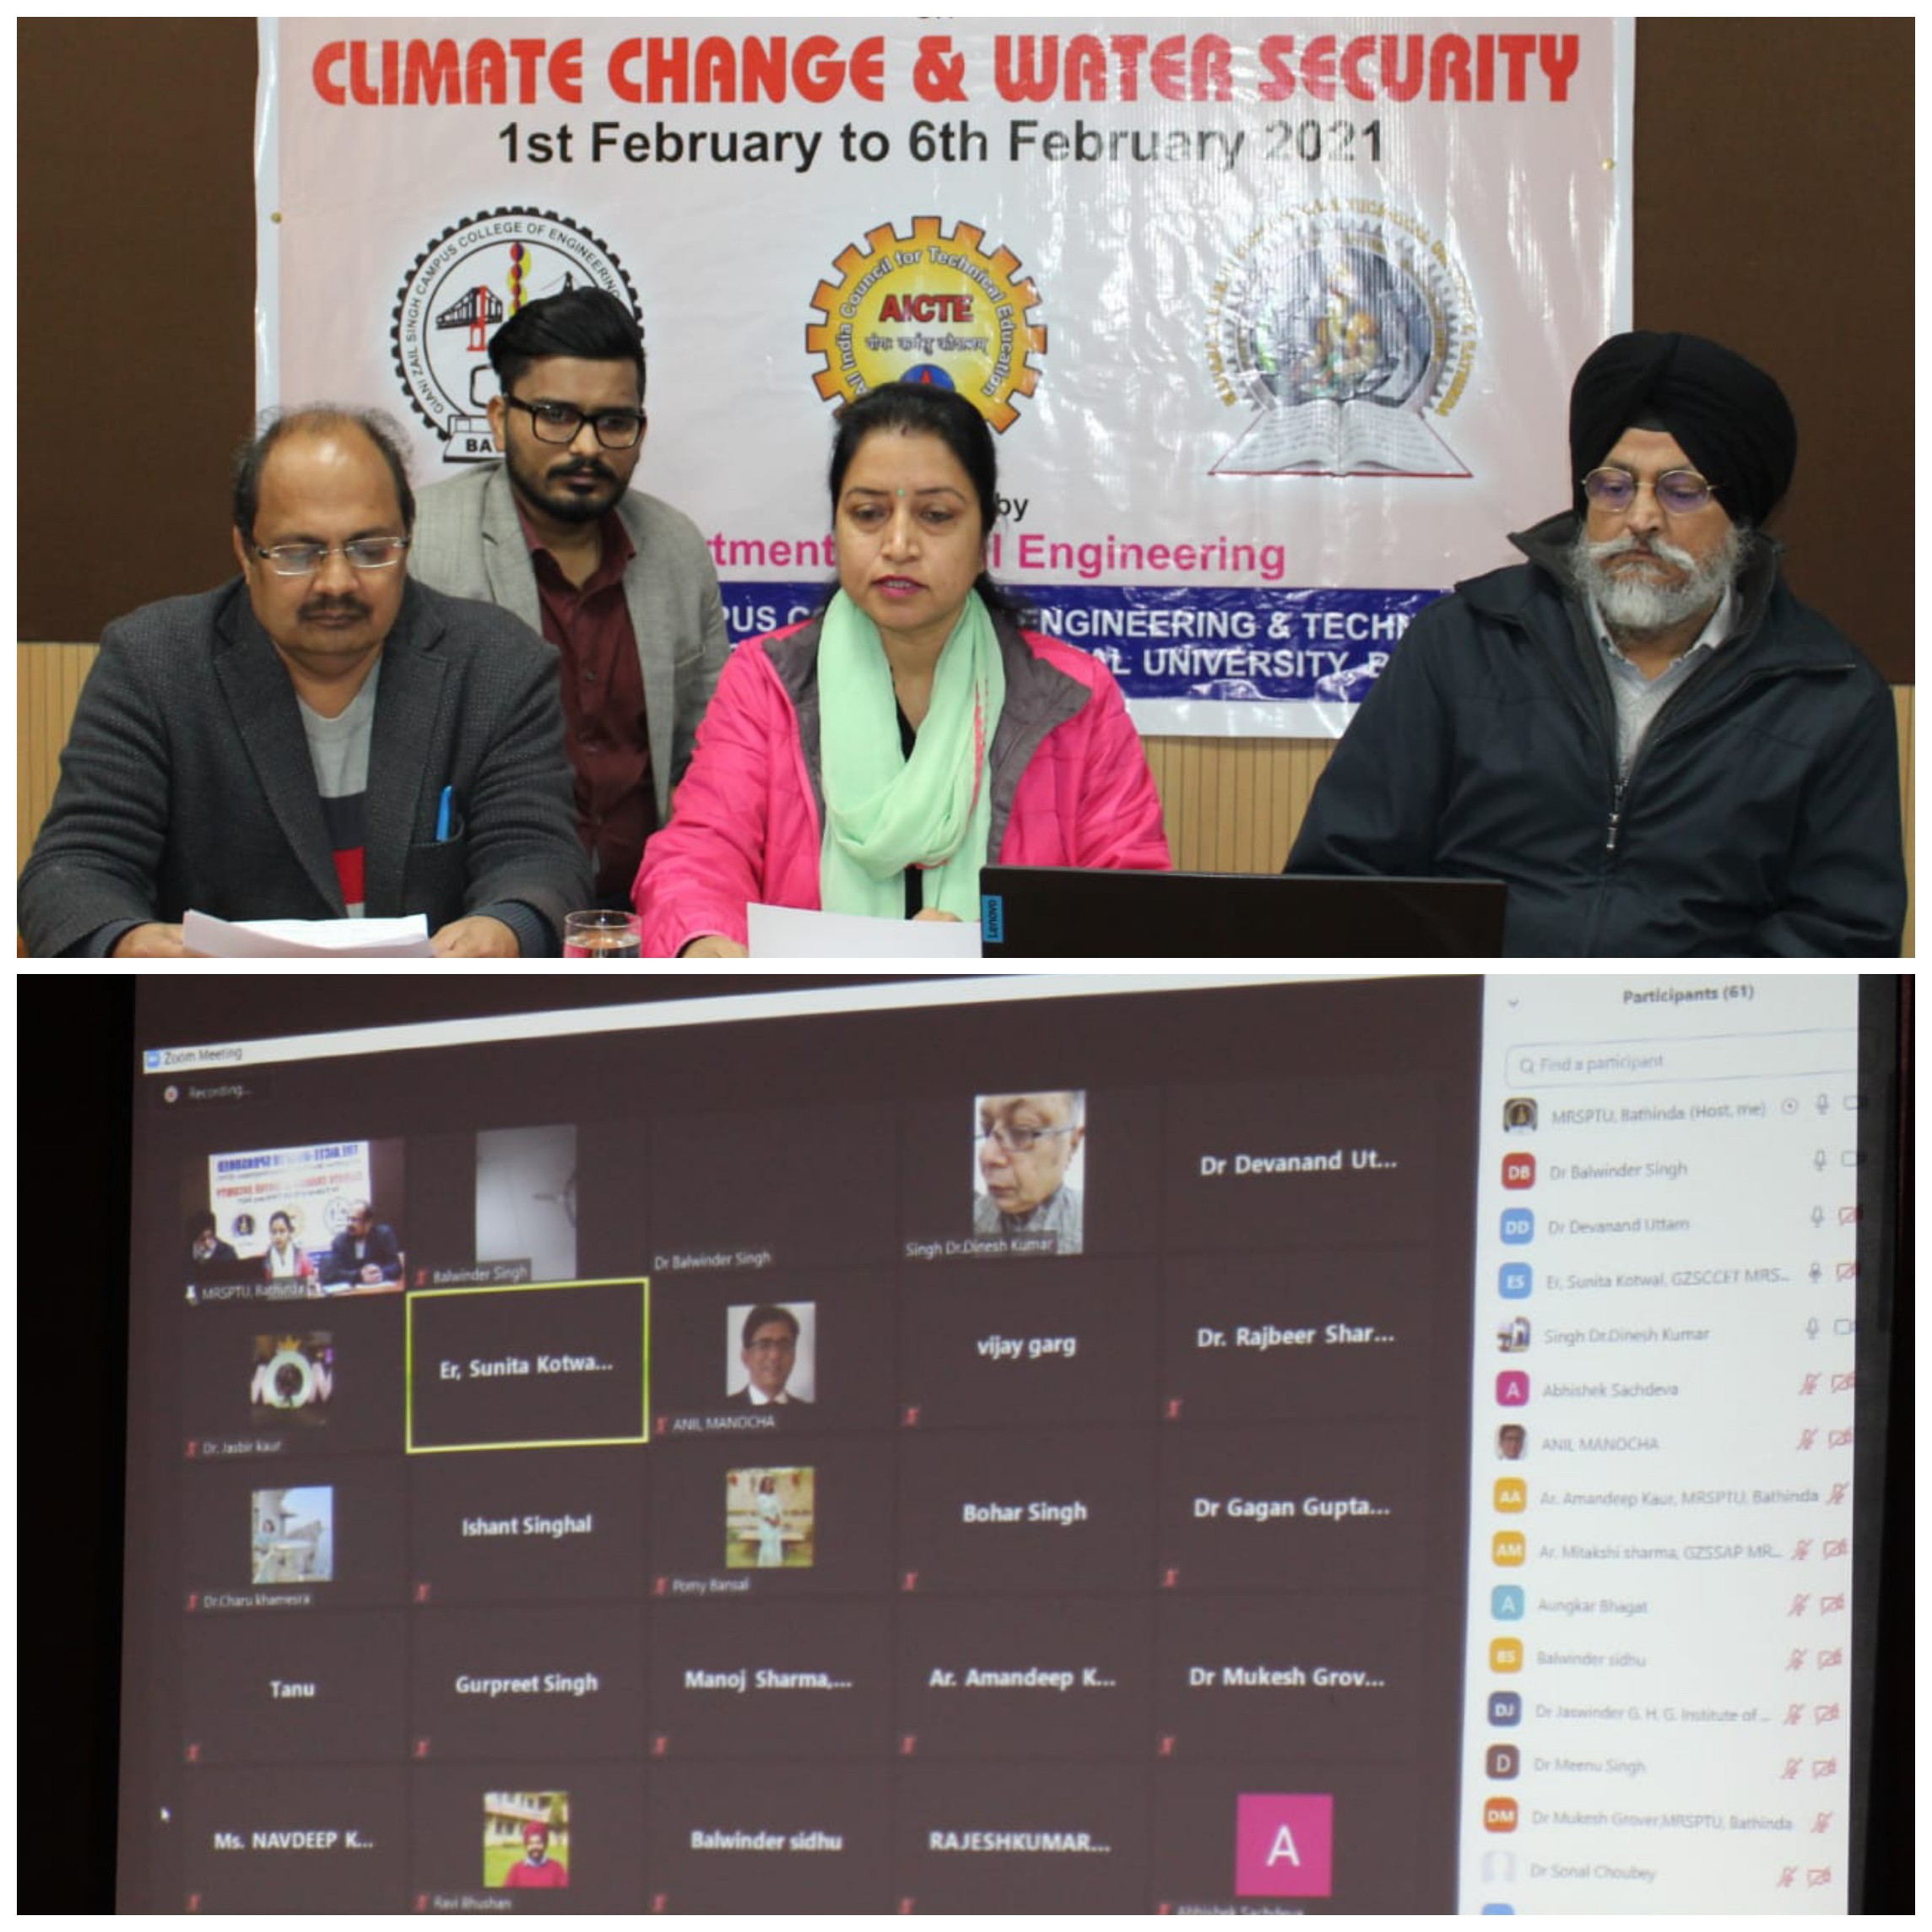 Inauguration of AICTE-MRSPTU 6-Day Short Term Training Programme (STTP) on Climate Change & Water Security being organized by the Civil Engineering Department, GZSCCET MRSPTU, Bathinda